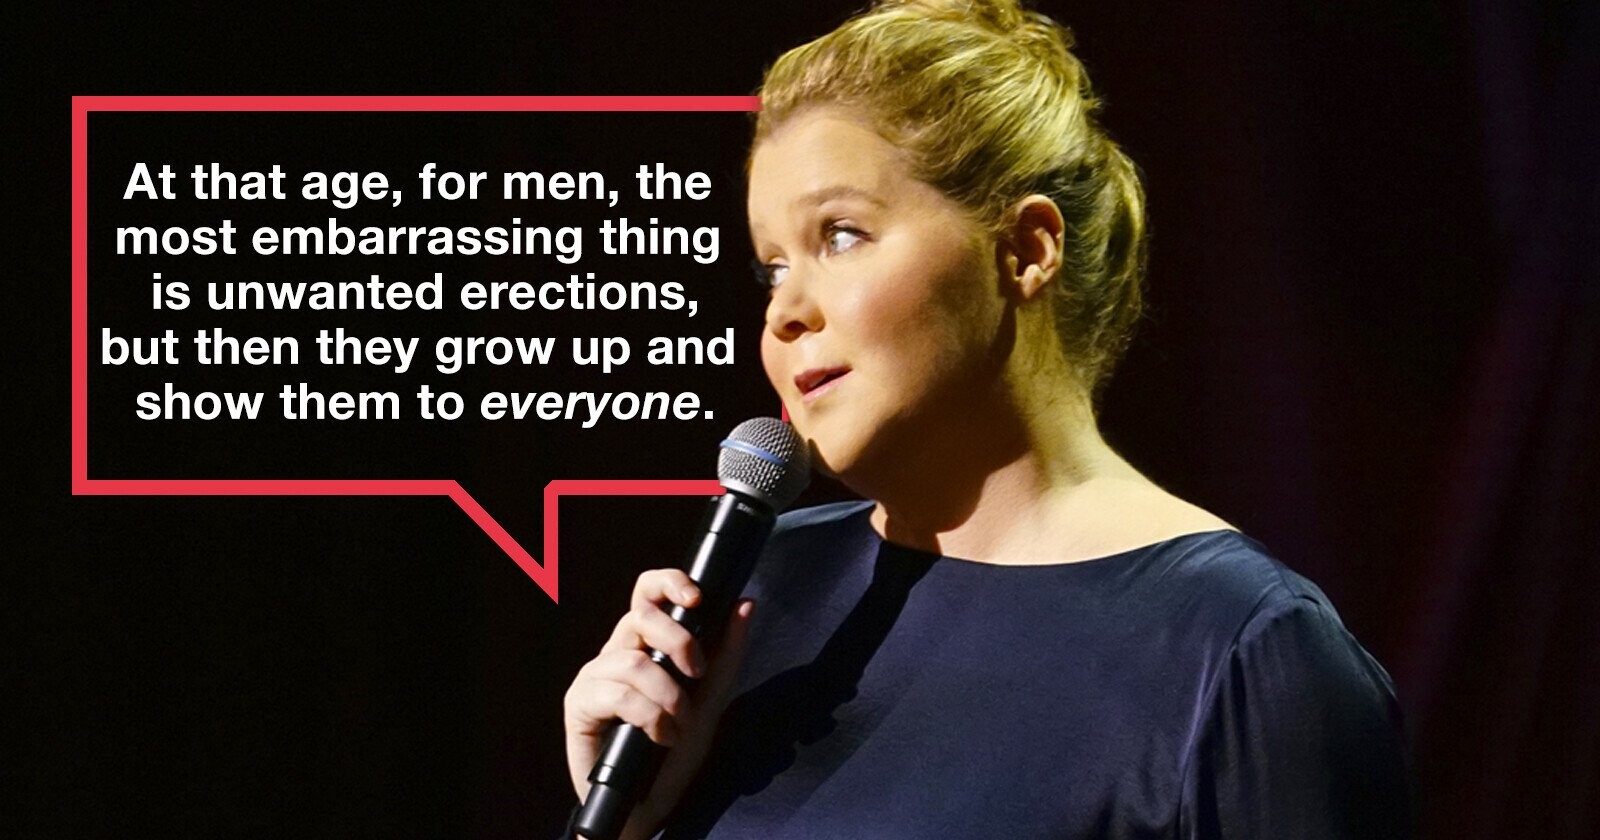 15 Amy Schumer Jokes and Moments for the Hall of Fame